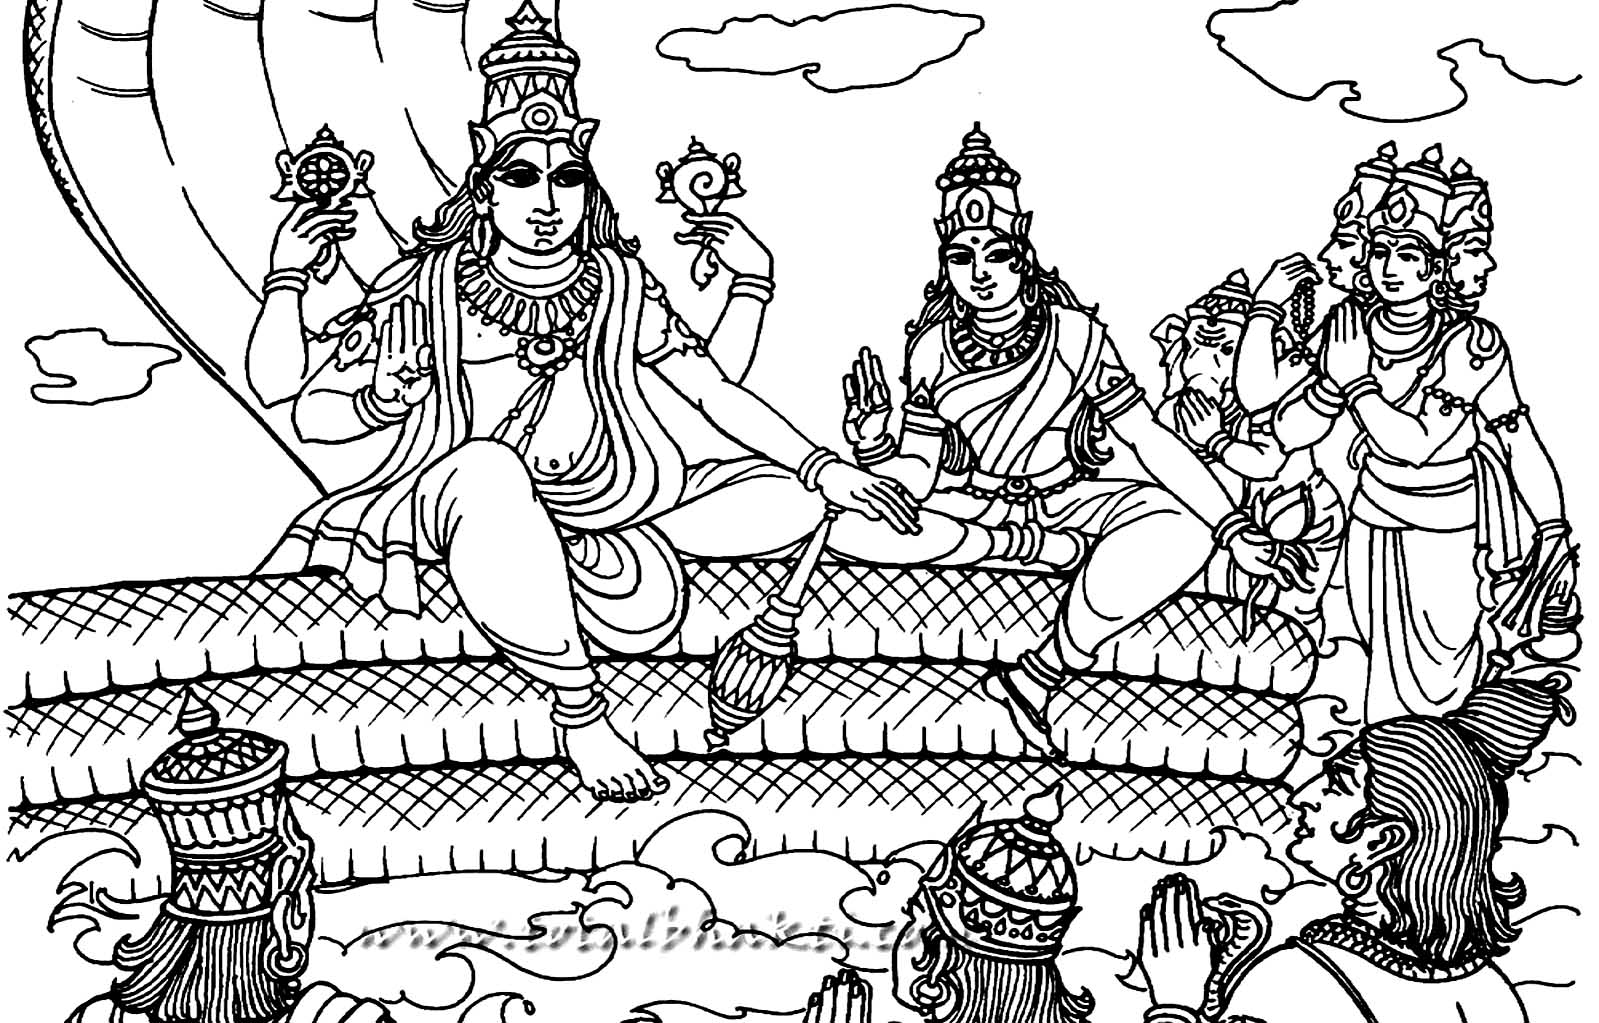 Vishnu is the 'preserver' in the Hindu trinity and the Supreme Being in its Vaishnavism tradition